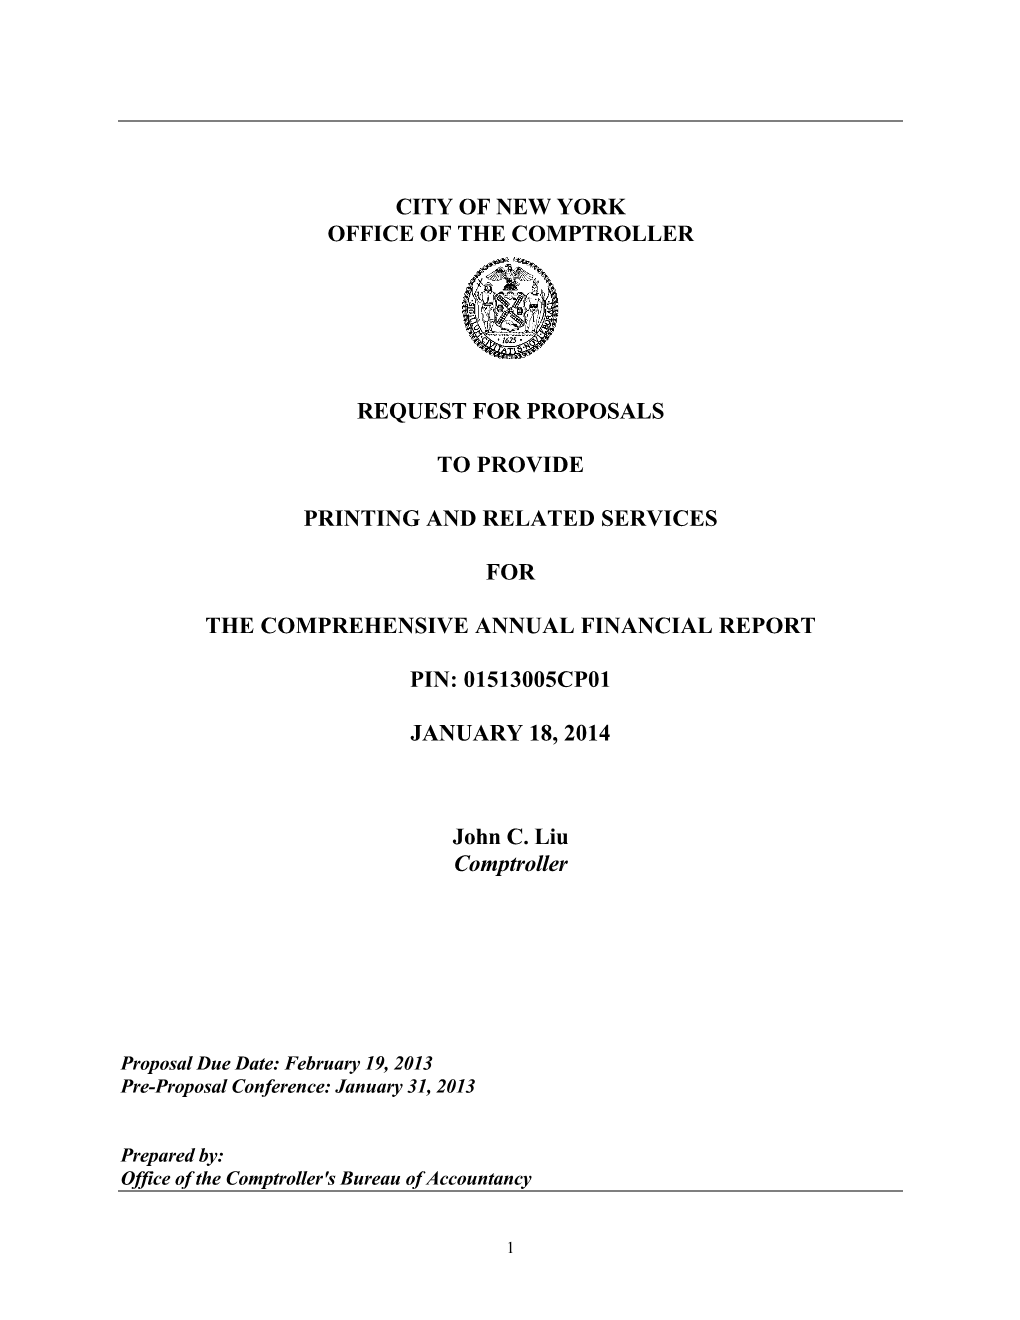 City of New York Office of the Comptroller Request